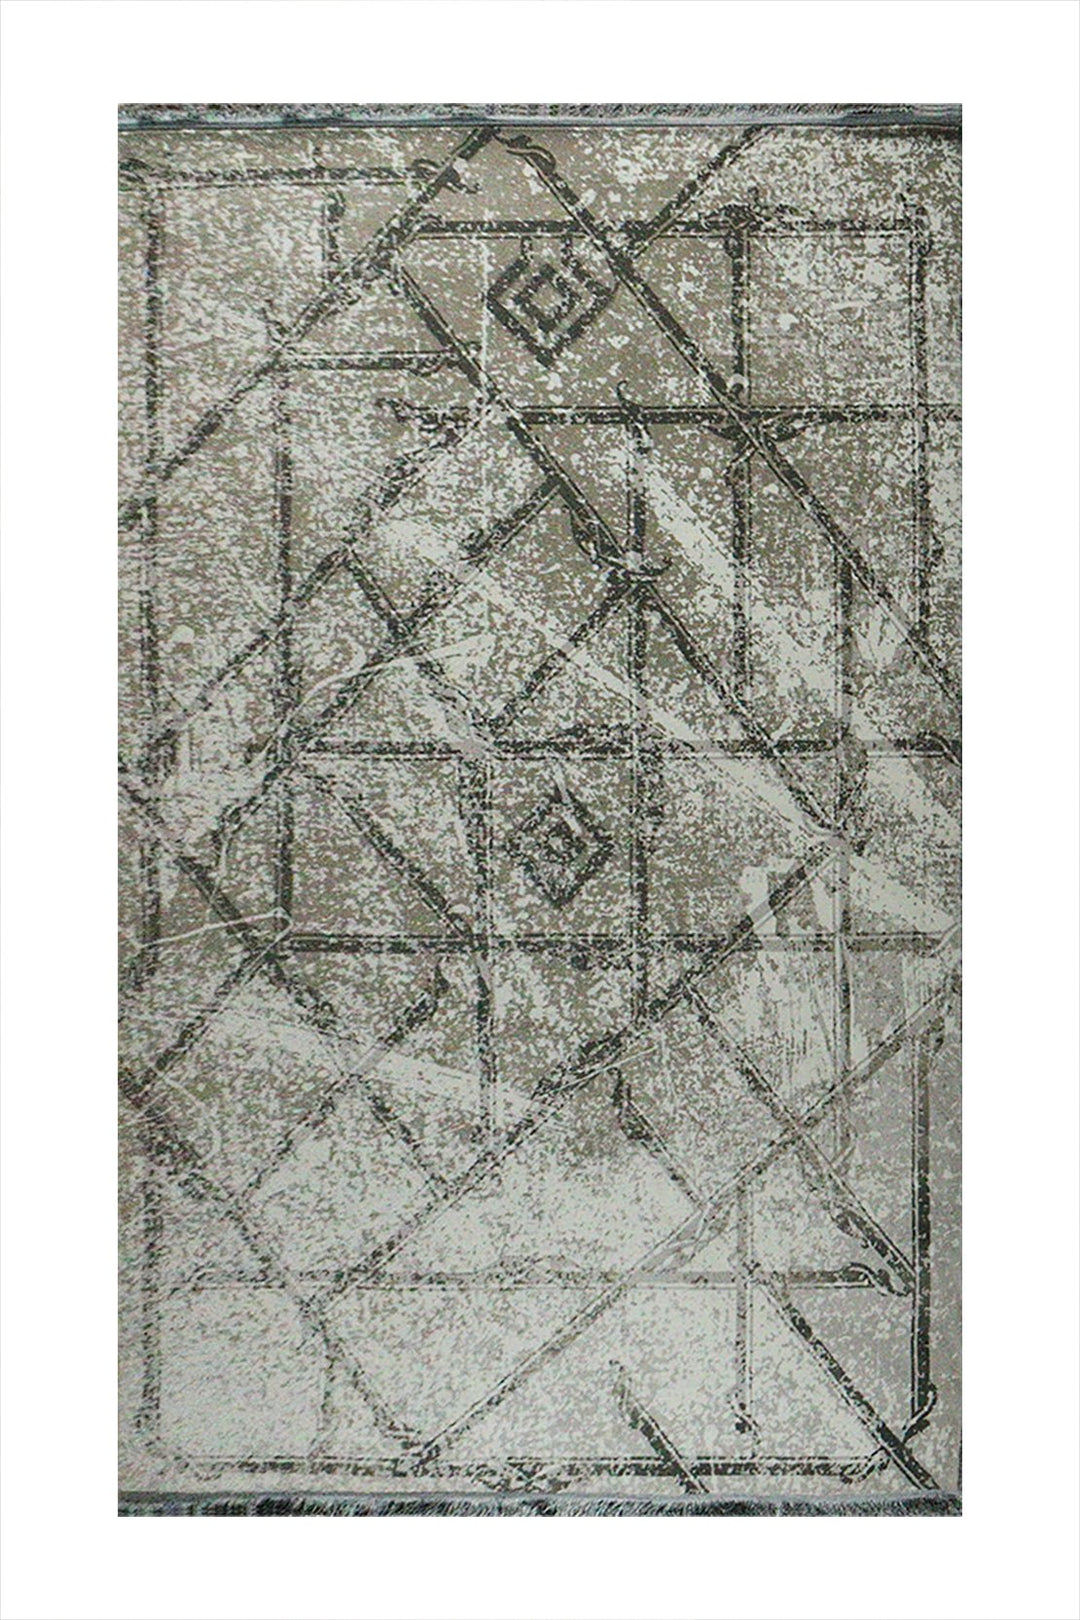 Iranian Premium Quality Farsh E Firozeh Rug - 6.5 x 9.8 FT - Gray - Resilient Construction for Long-Lasting Use - V Surfaces